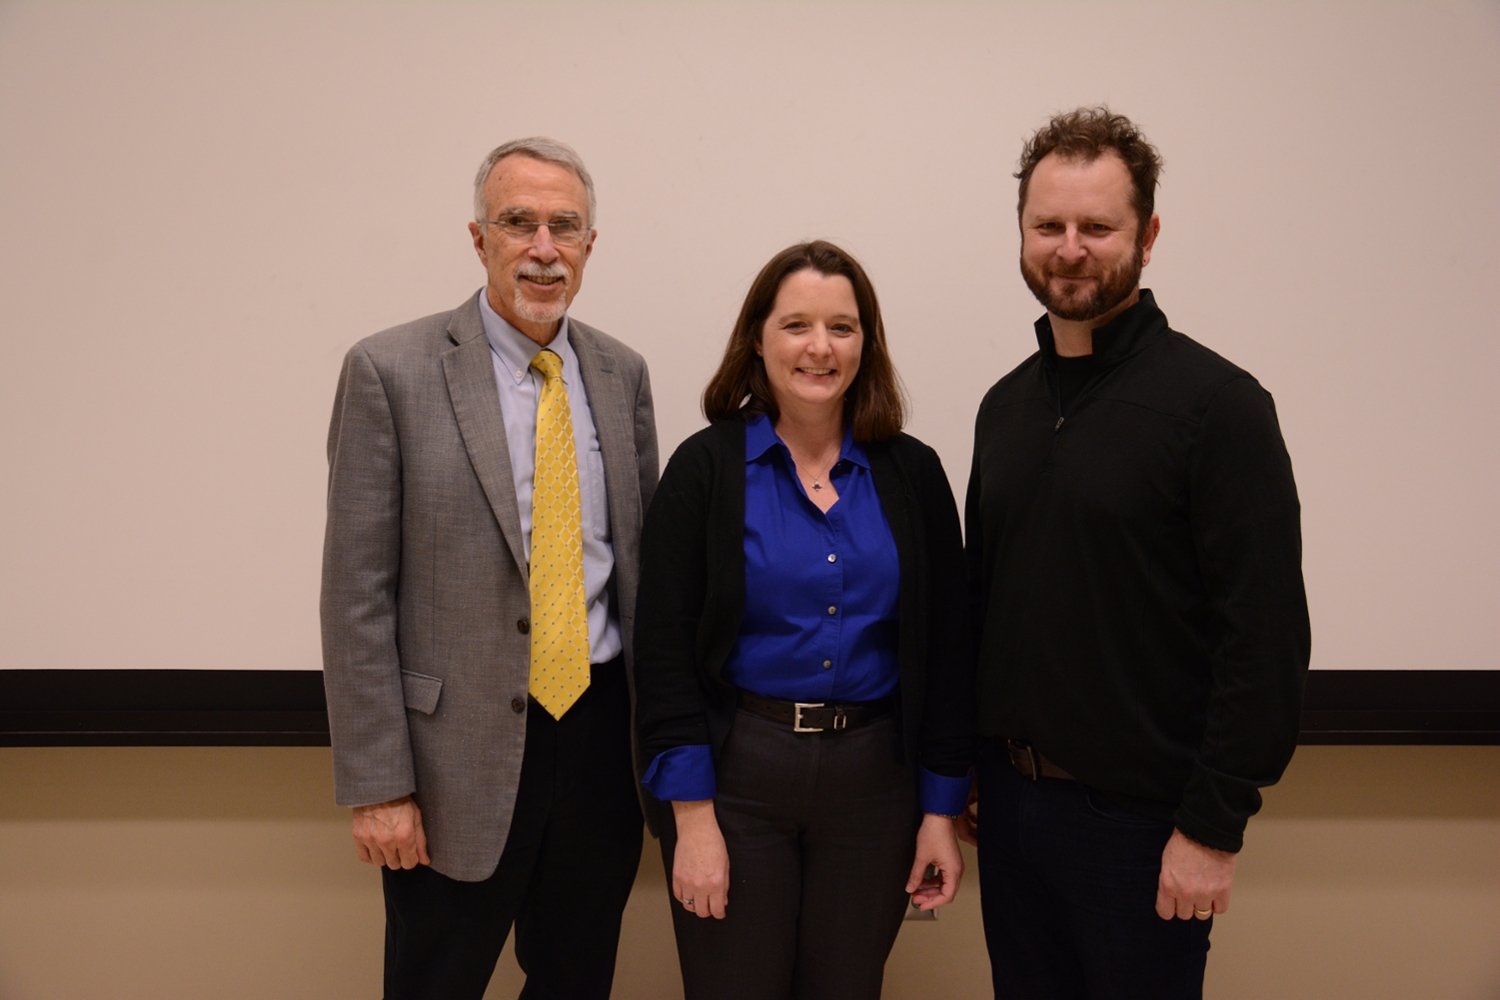 Dr. Anne E. V. Gorden and Dr. Paul A. Cobine Share Award-Winning Work at New COSAM Lecture Series